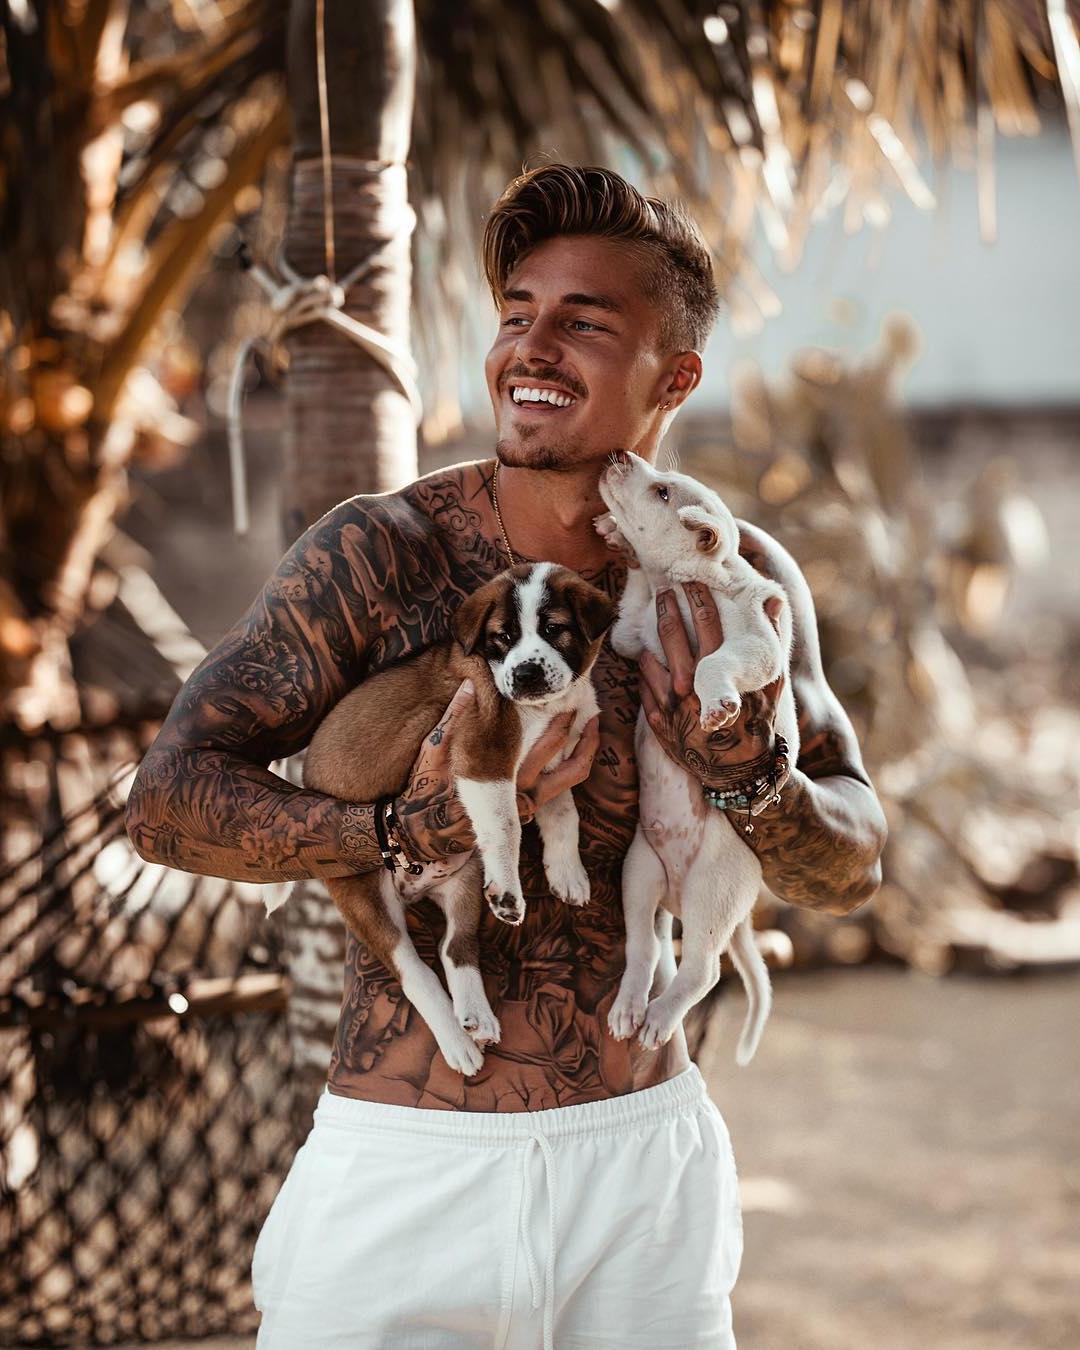 adorable-fit-tattoo-body-dude-smiling-playing-with-small-cute-dog-puppies